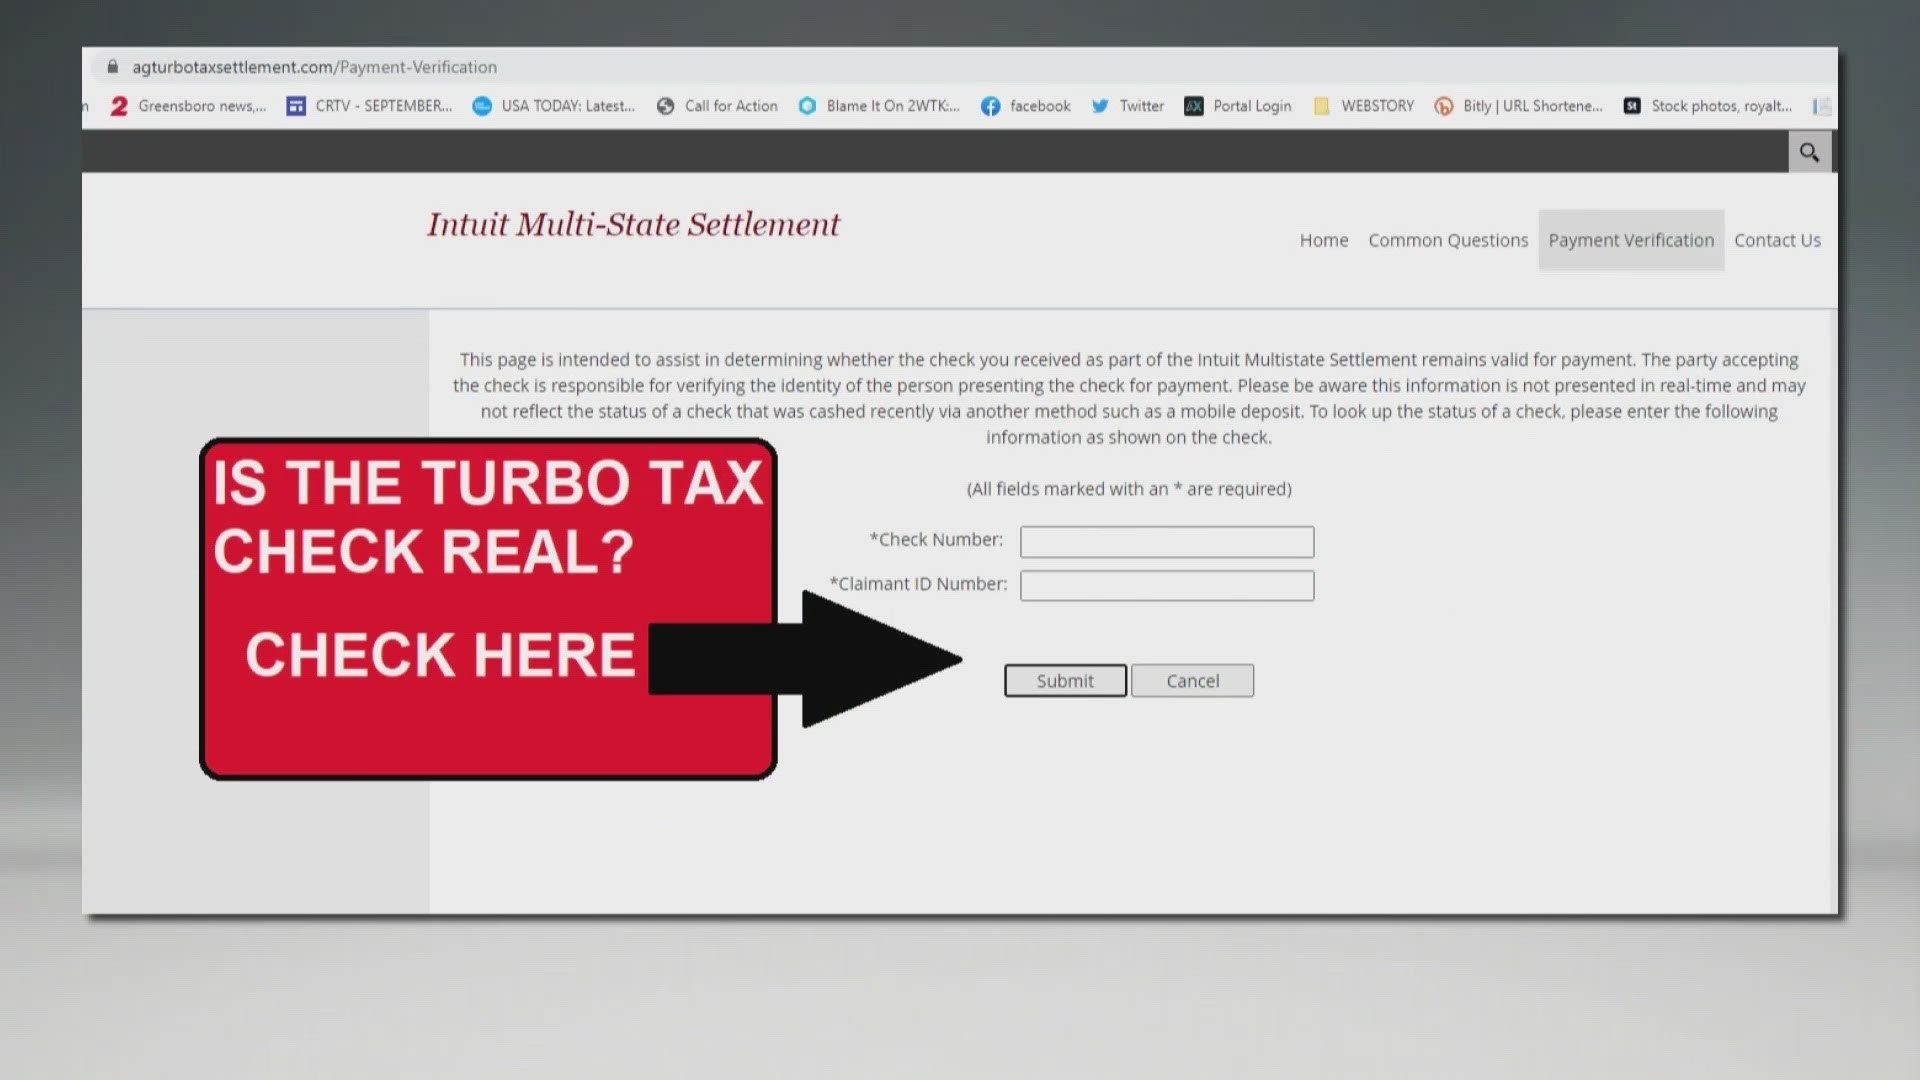 Turbo Tax Checks How to make sure it's for real